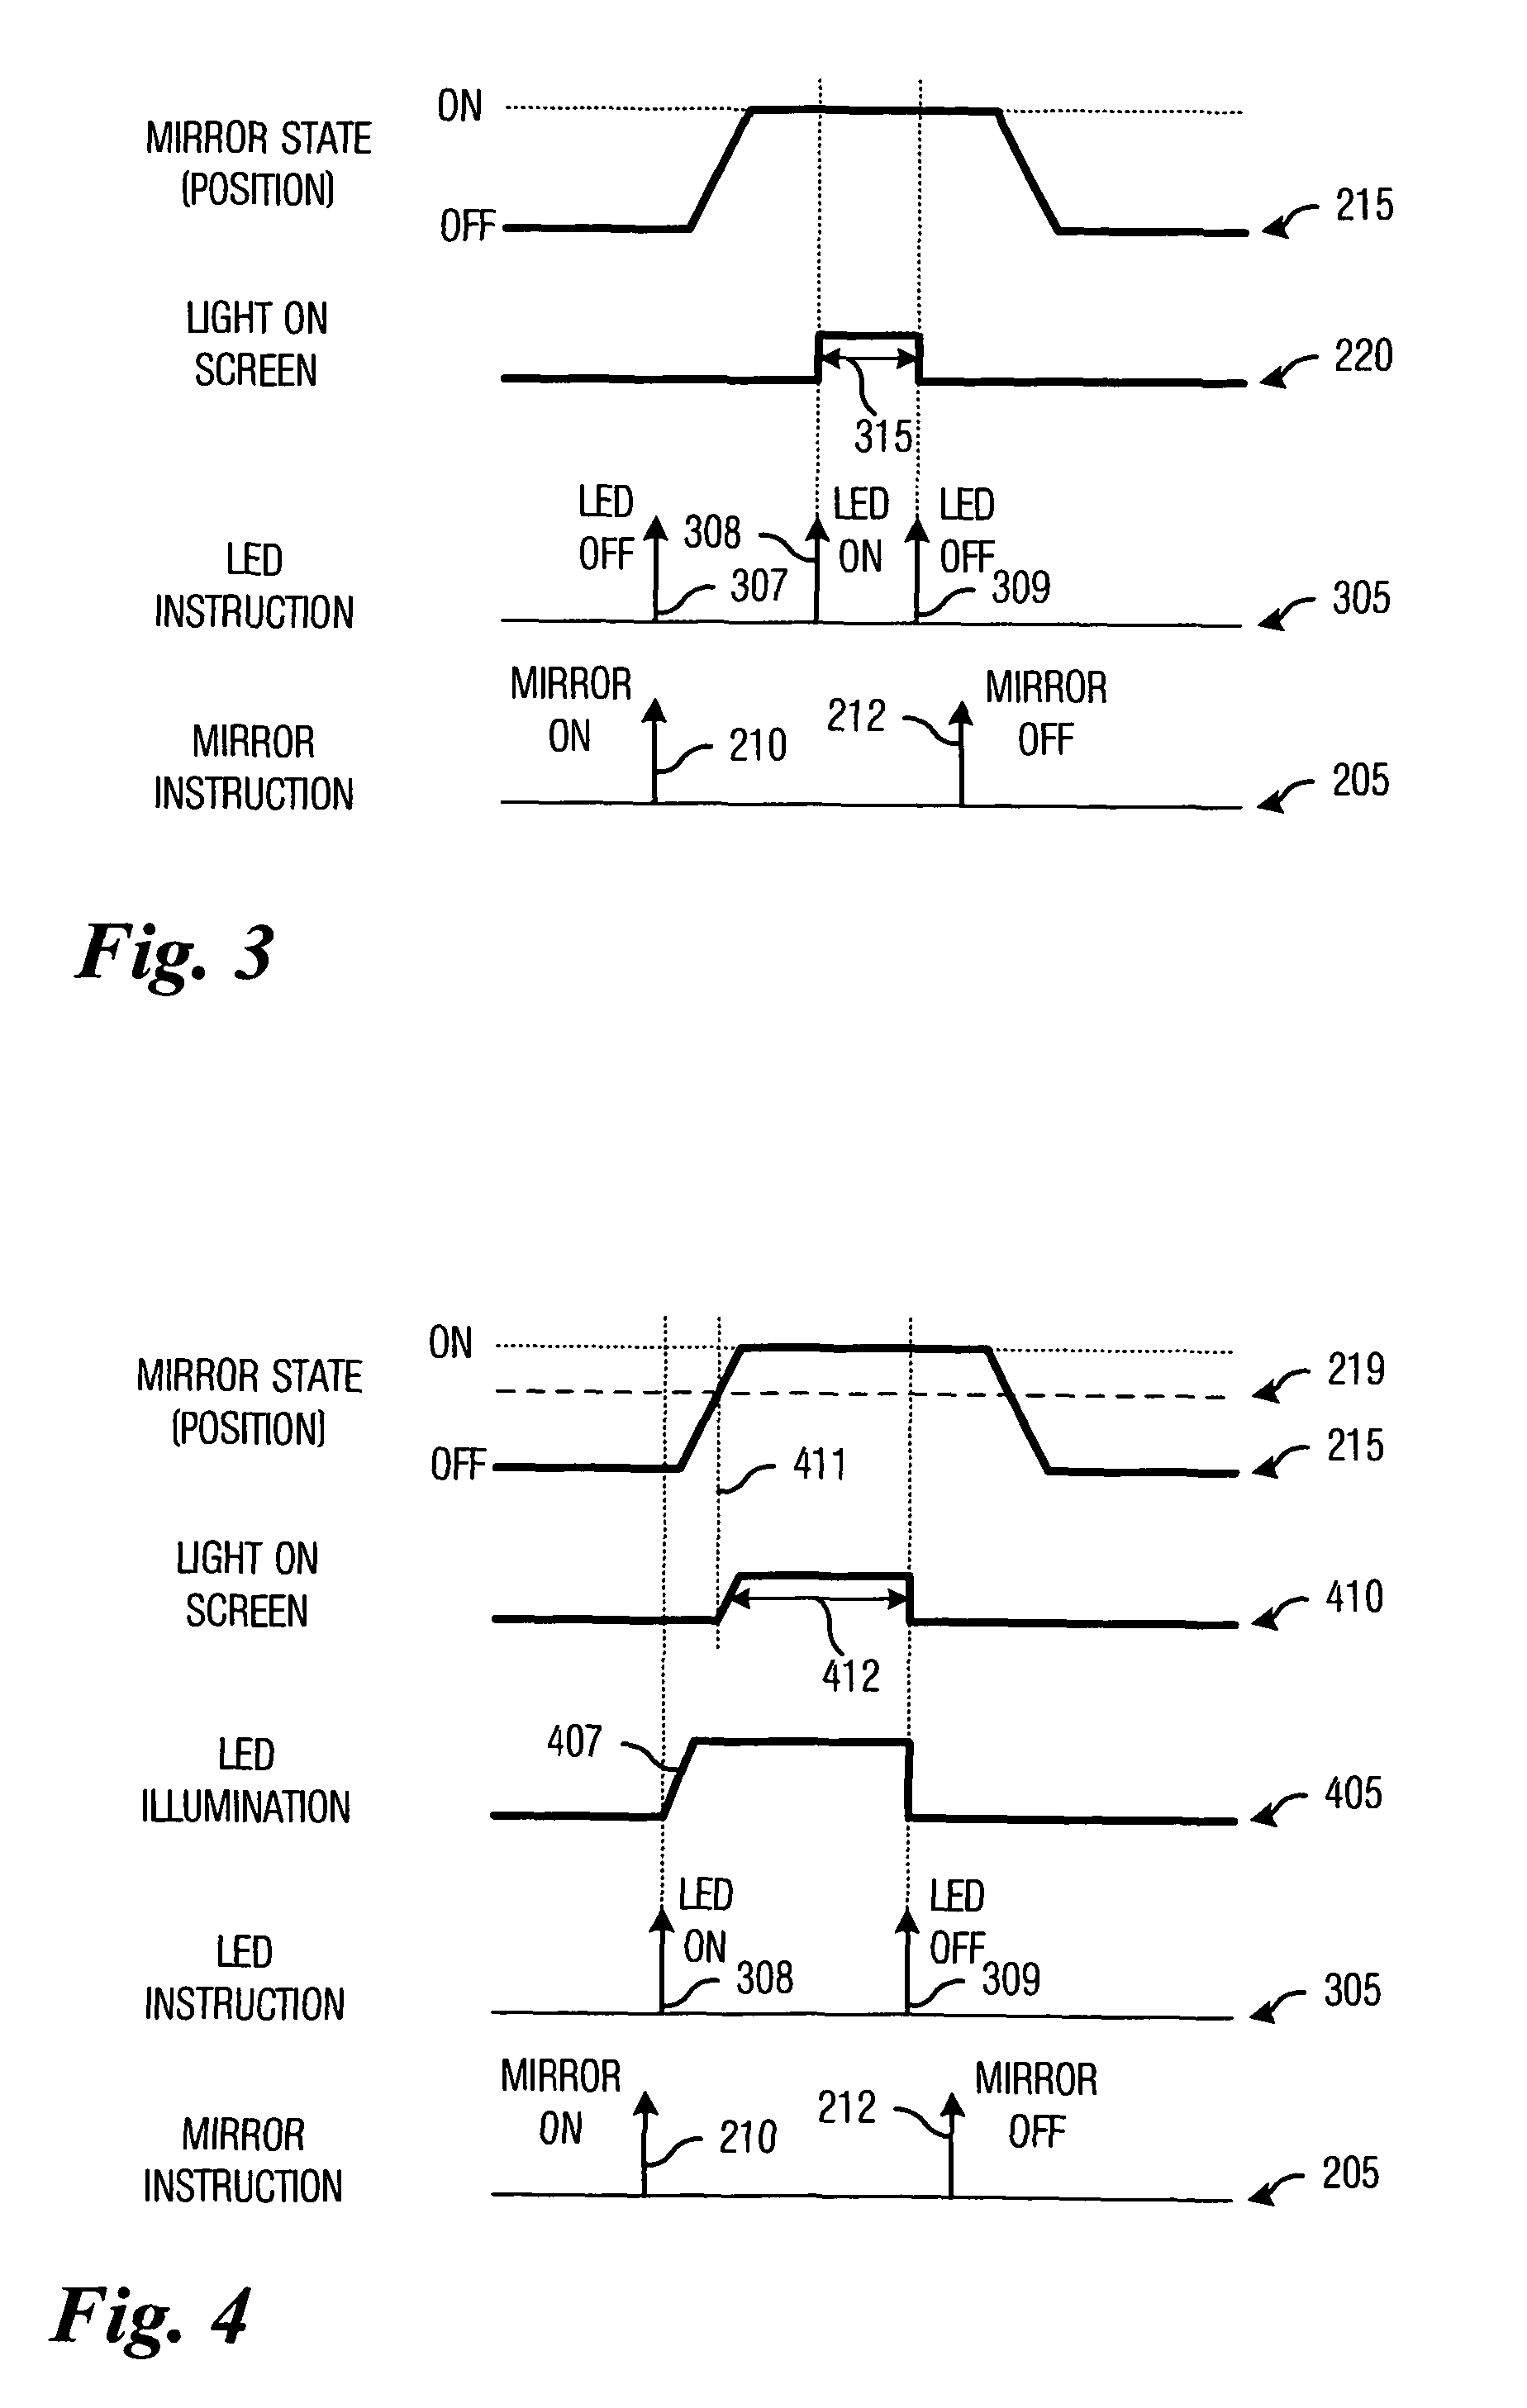 Increased intensity resolution for pulse-width modulation-based displays with light emitting diode illumination